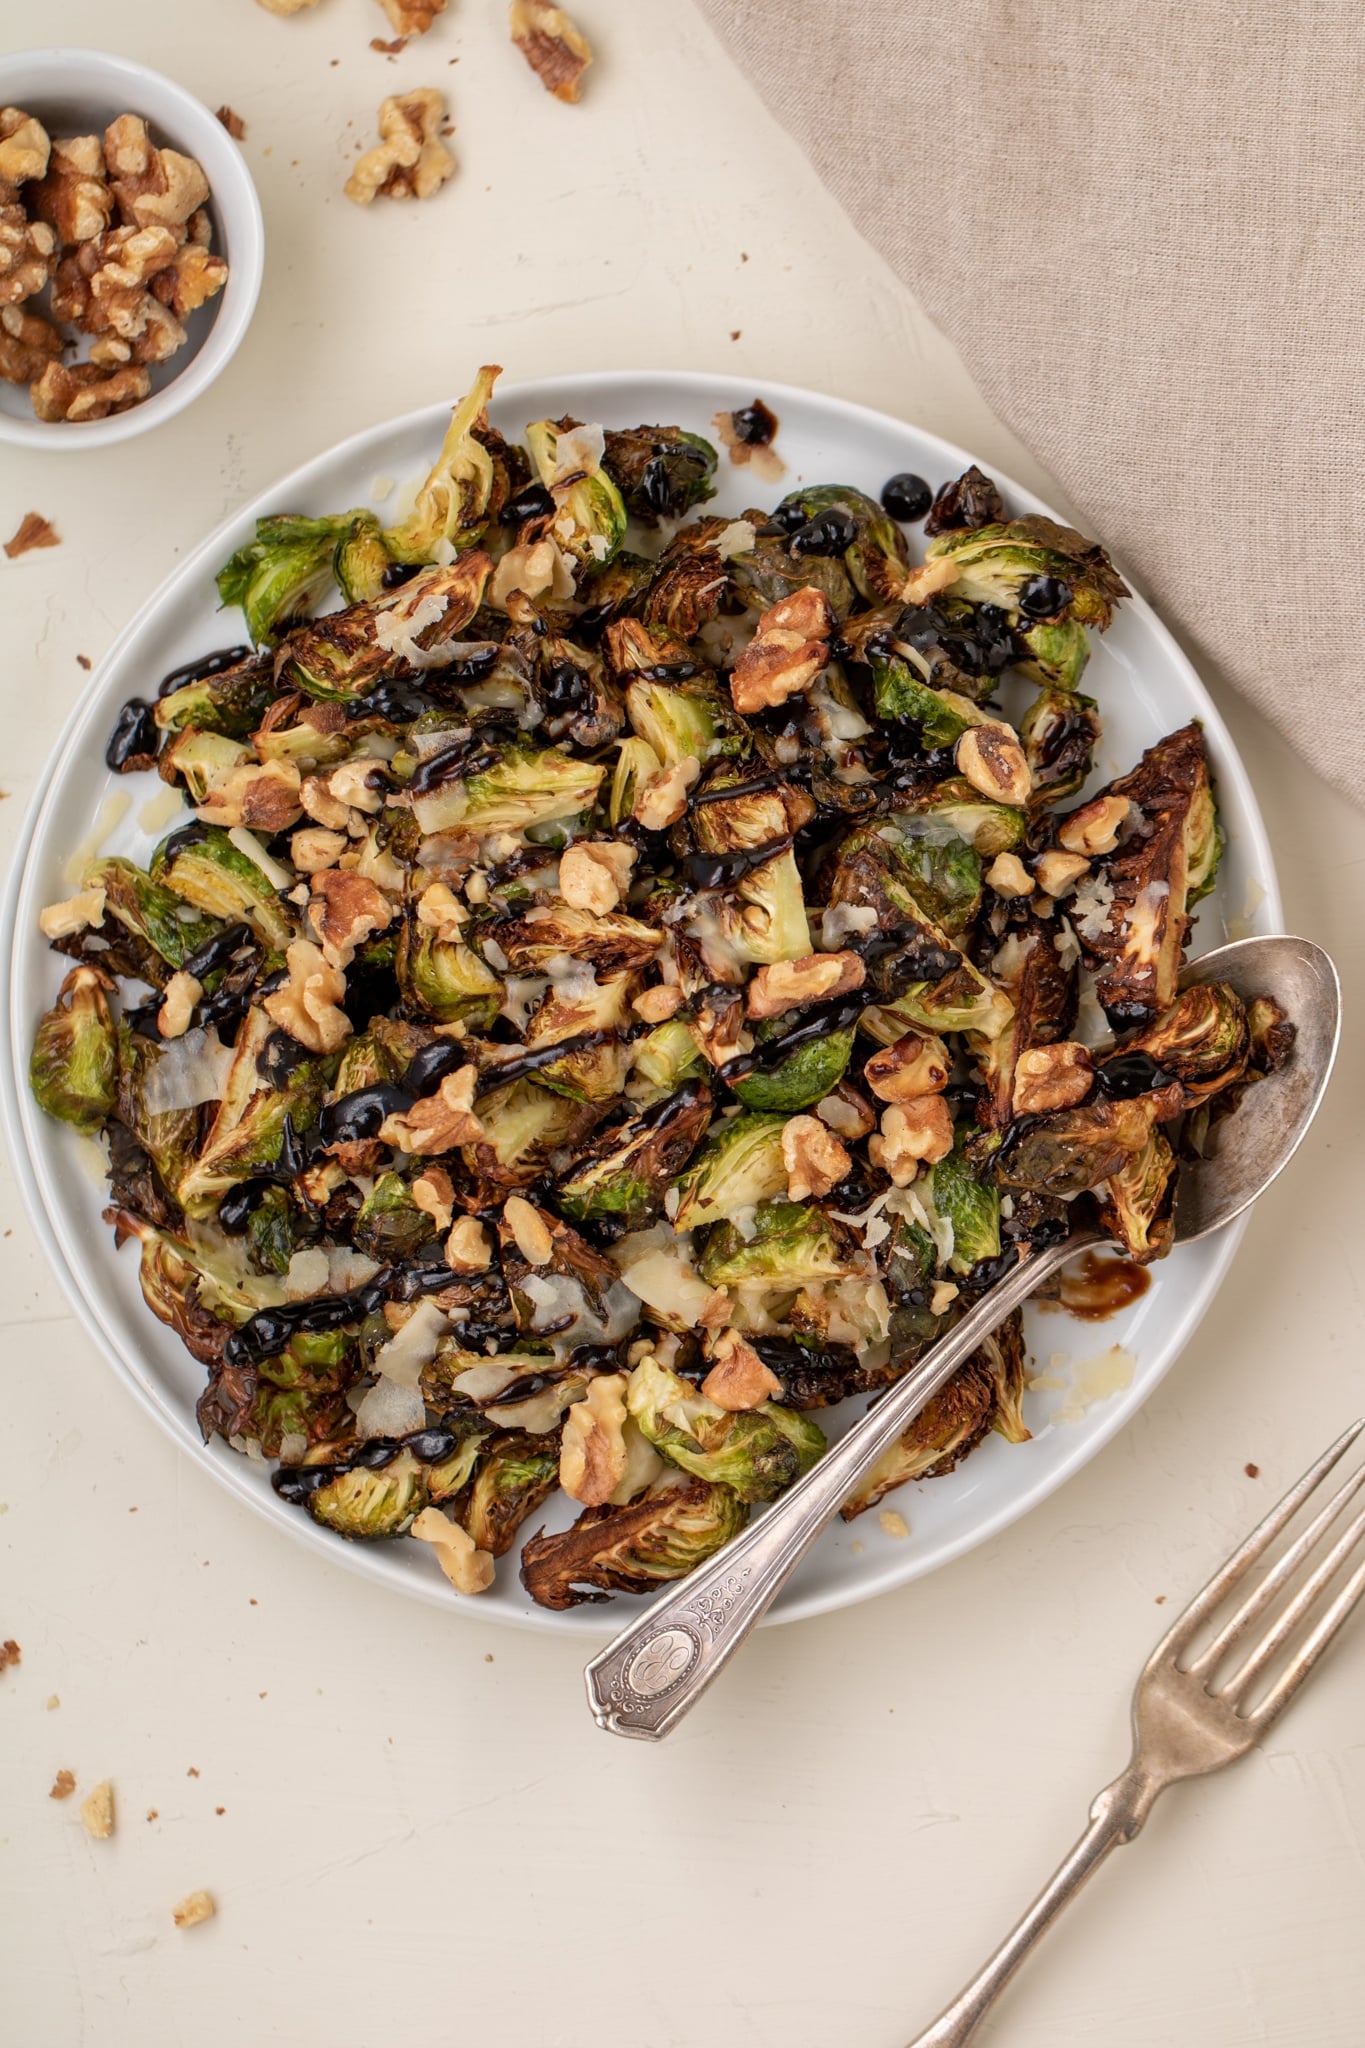 Over head shot of brussel sprouts in a plate with a spoon next to them